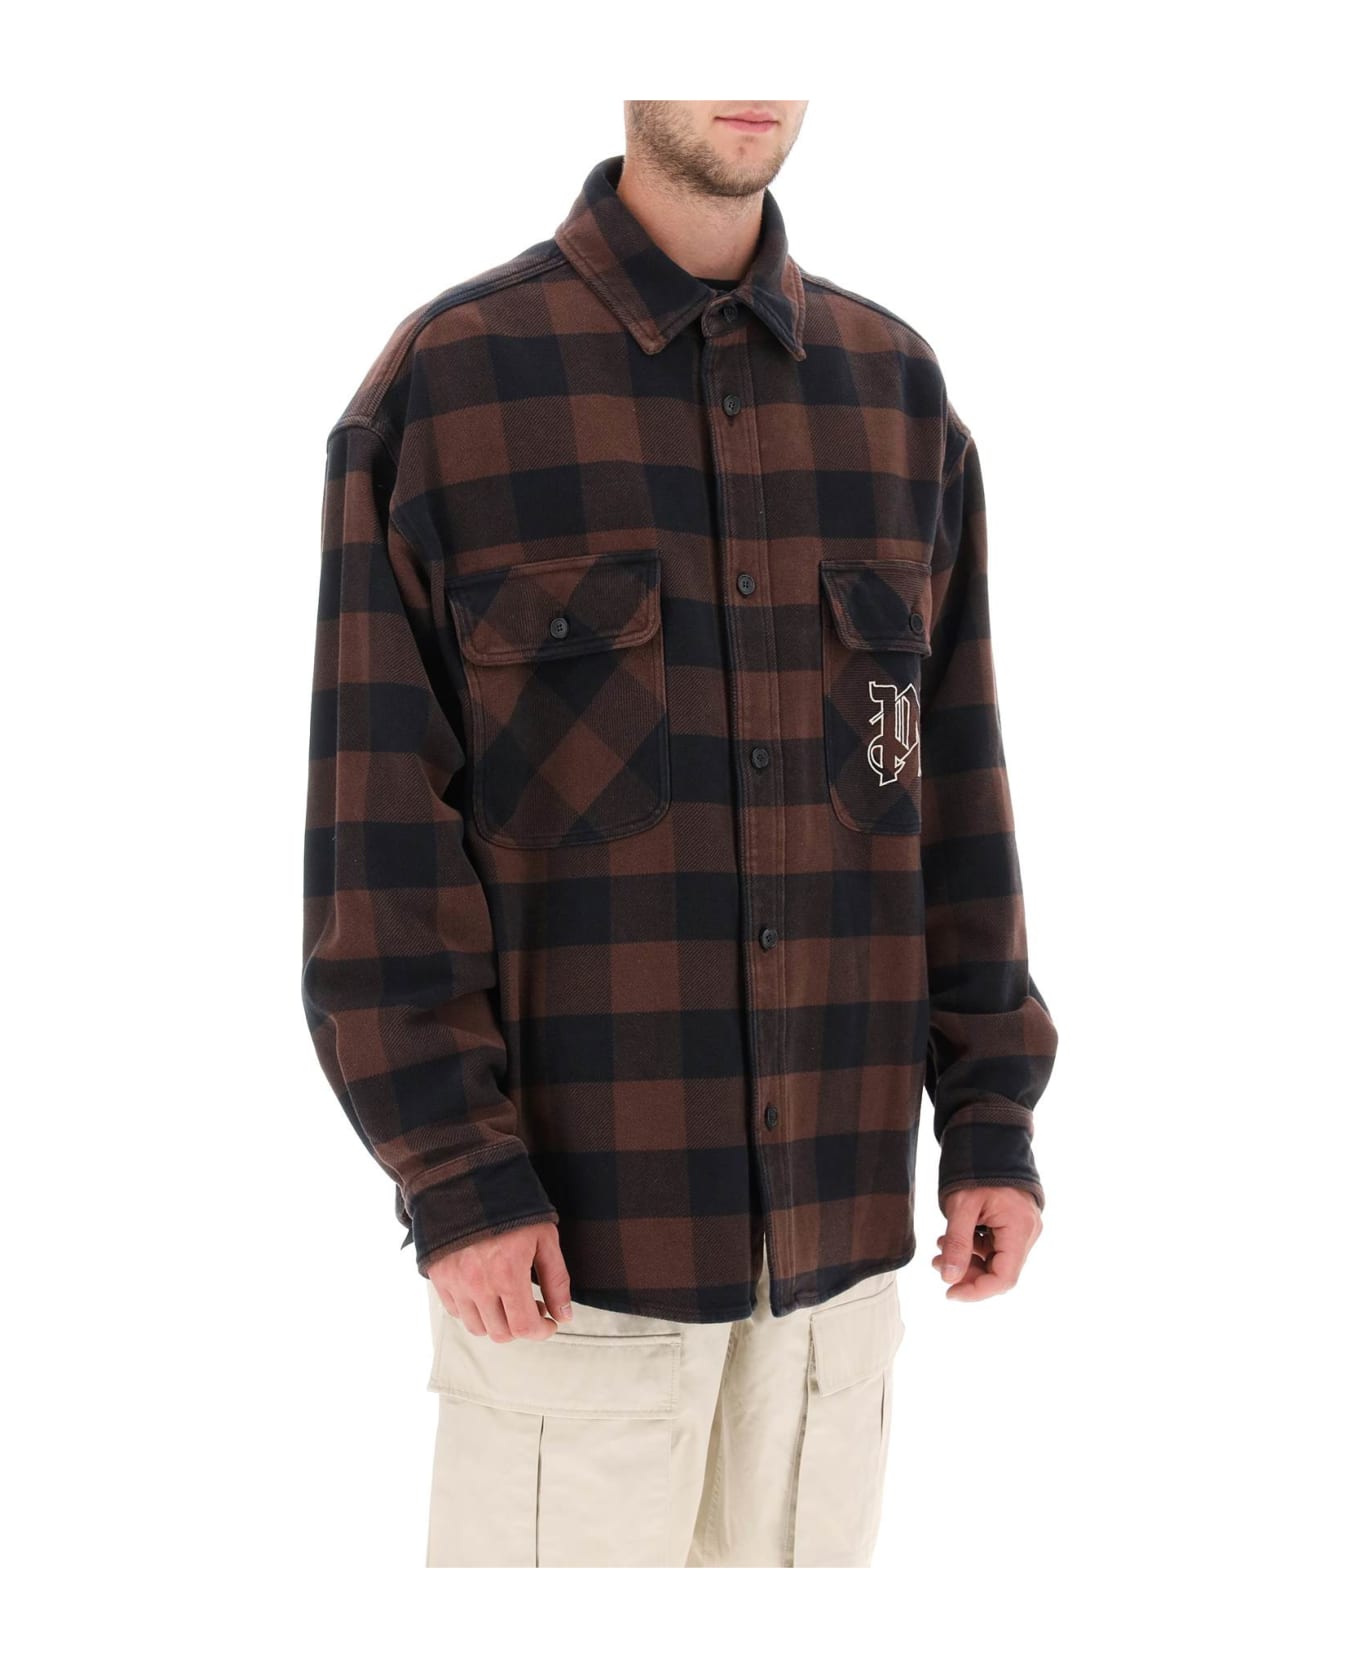 Palm Angels Flannel Overshirt With Check Motif - brown ジャケット